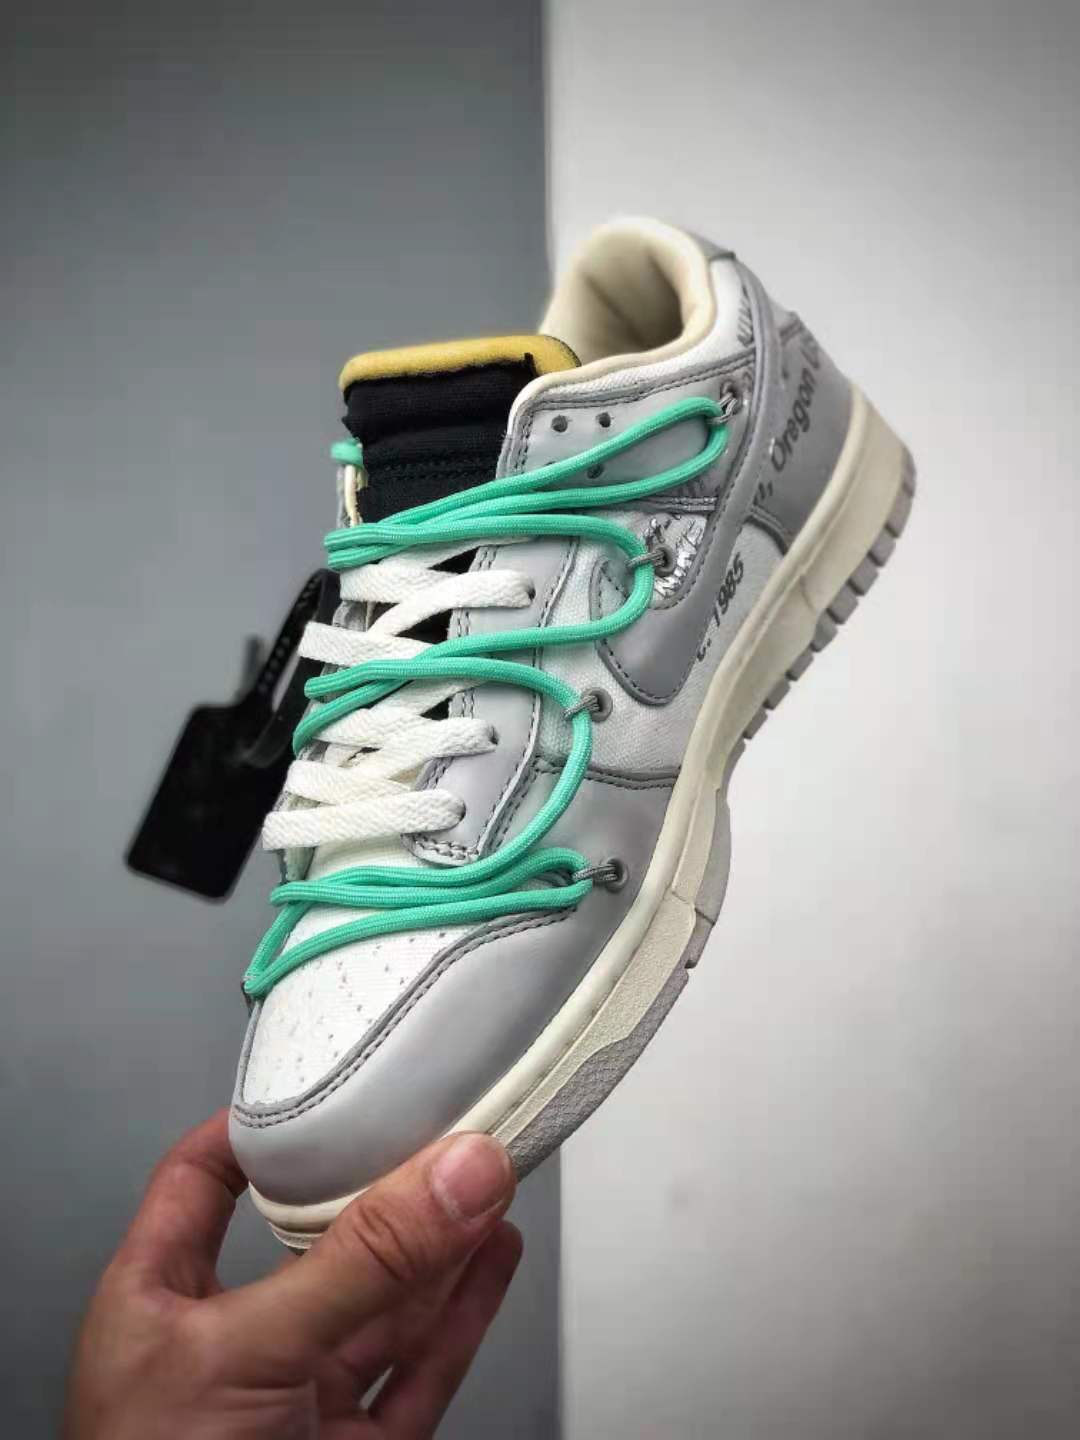 Off-White x Nike SB Dunk Low 04 of 50 OW White Grey Green DM1602-114: Limited Edition Collaboration